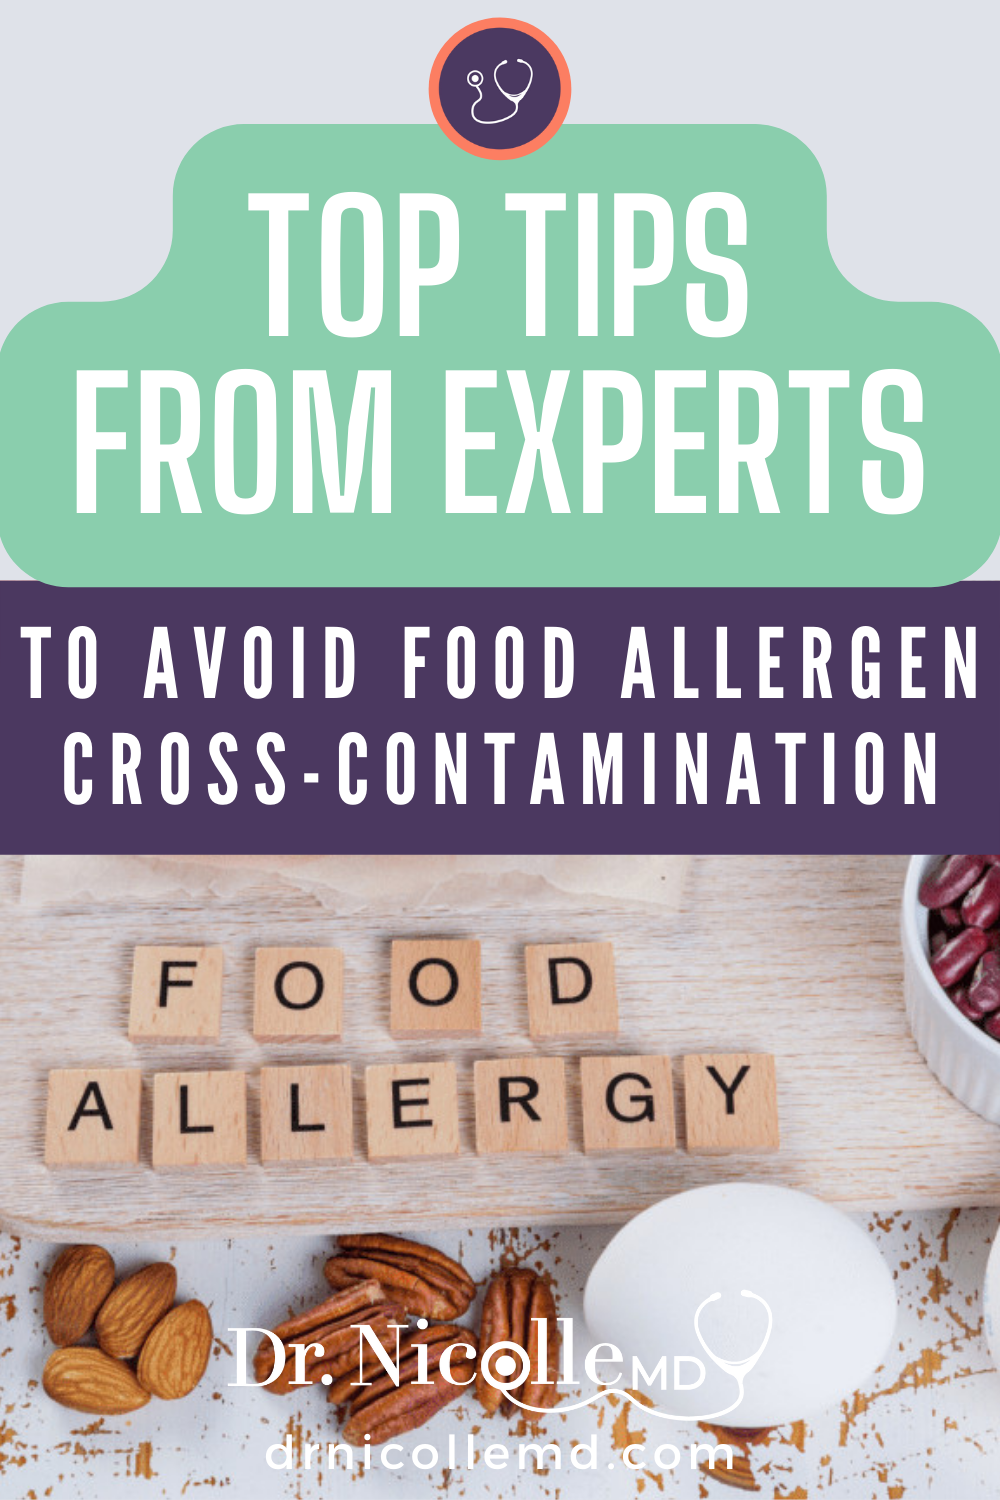 Top Tips from Experts to Avoid Food Allergen Cross-Contamination